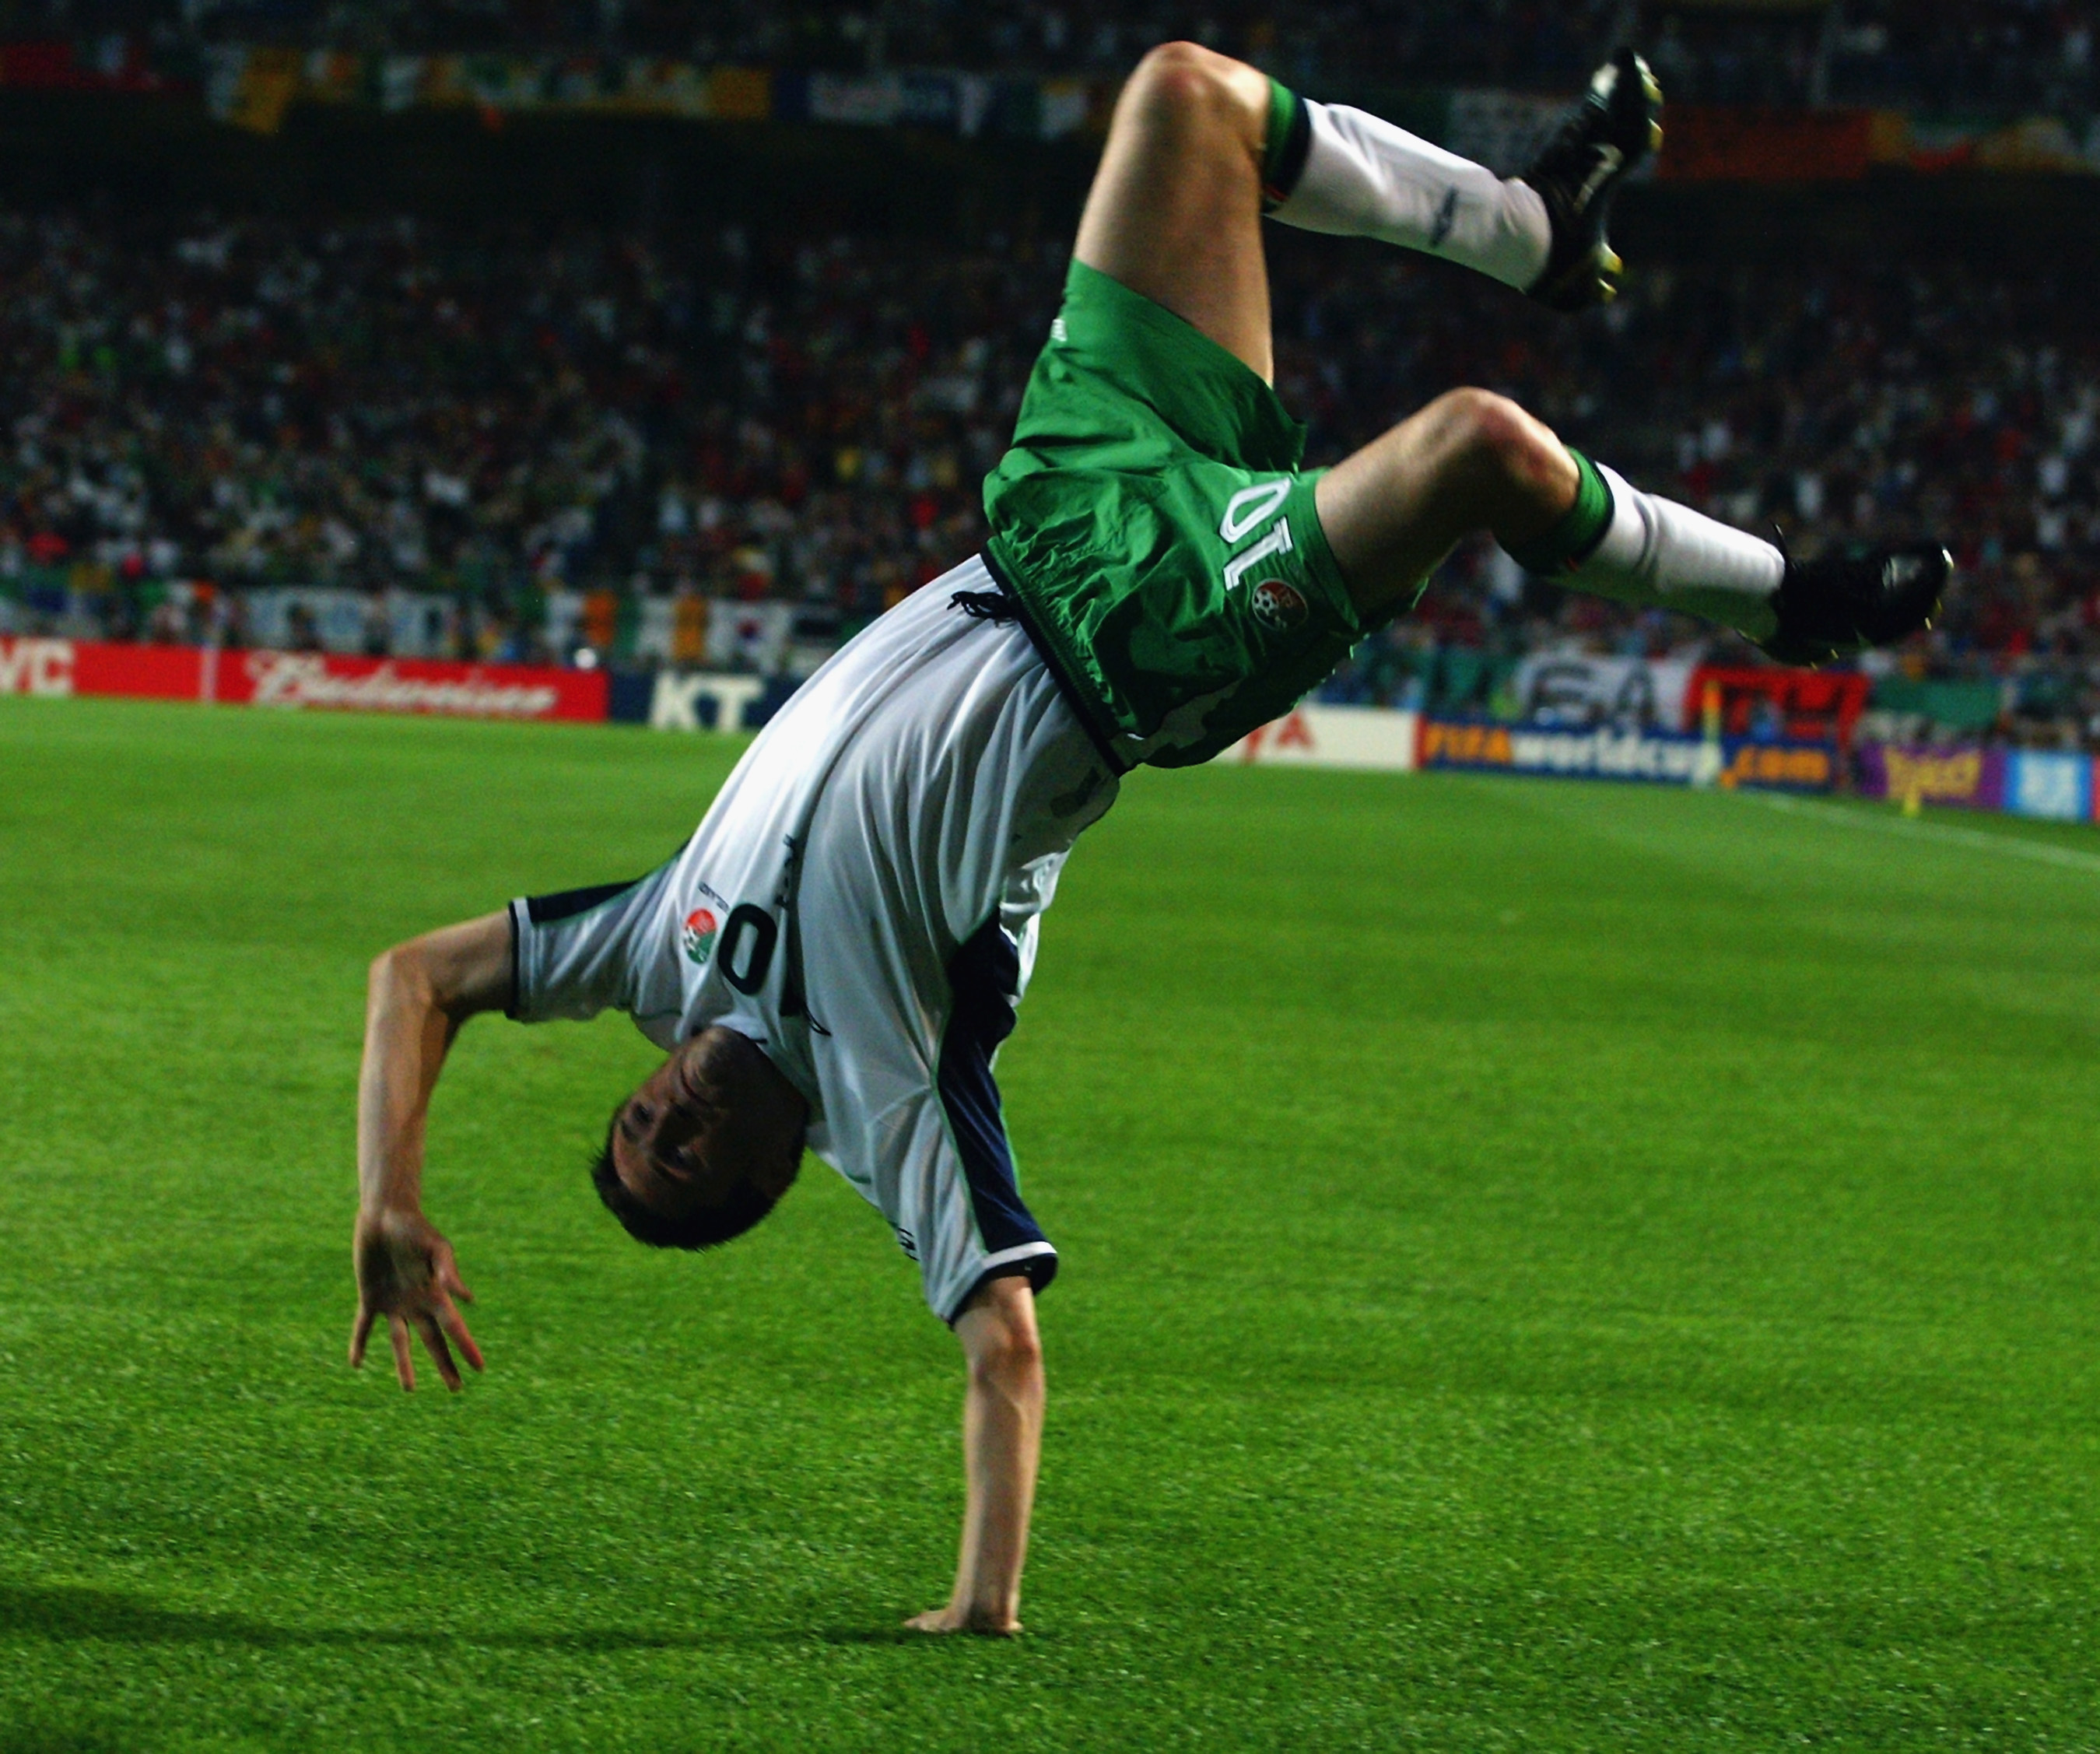 SUWON - JUNE 16:  Robbie Keane of the Republic of Ireland celebrates scoring a dramatic penalty kick during the FIFA World Cup Finals 2002 Second Round match between Spain and Republic of Ireland played at the Suwon World Cup Stadium, in Suwon, South Kore